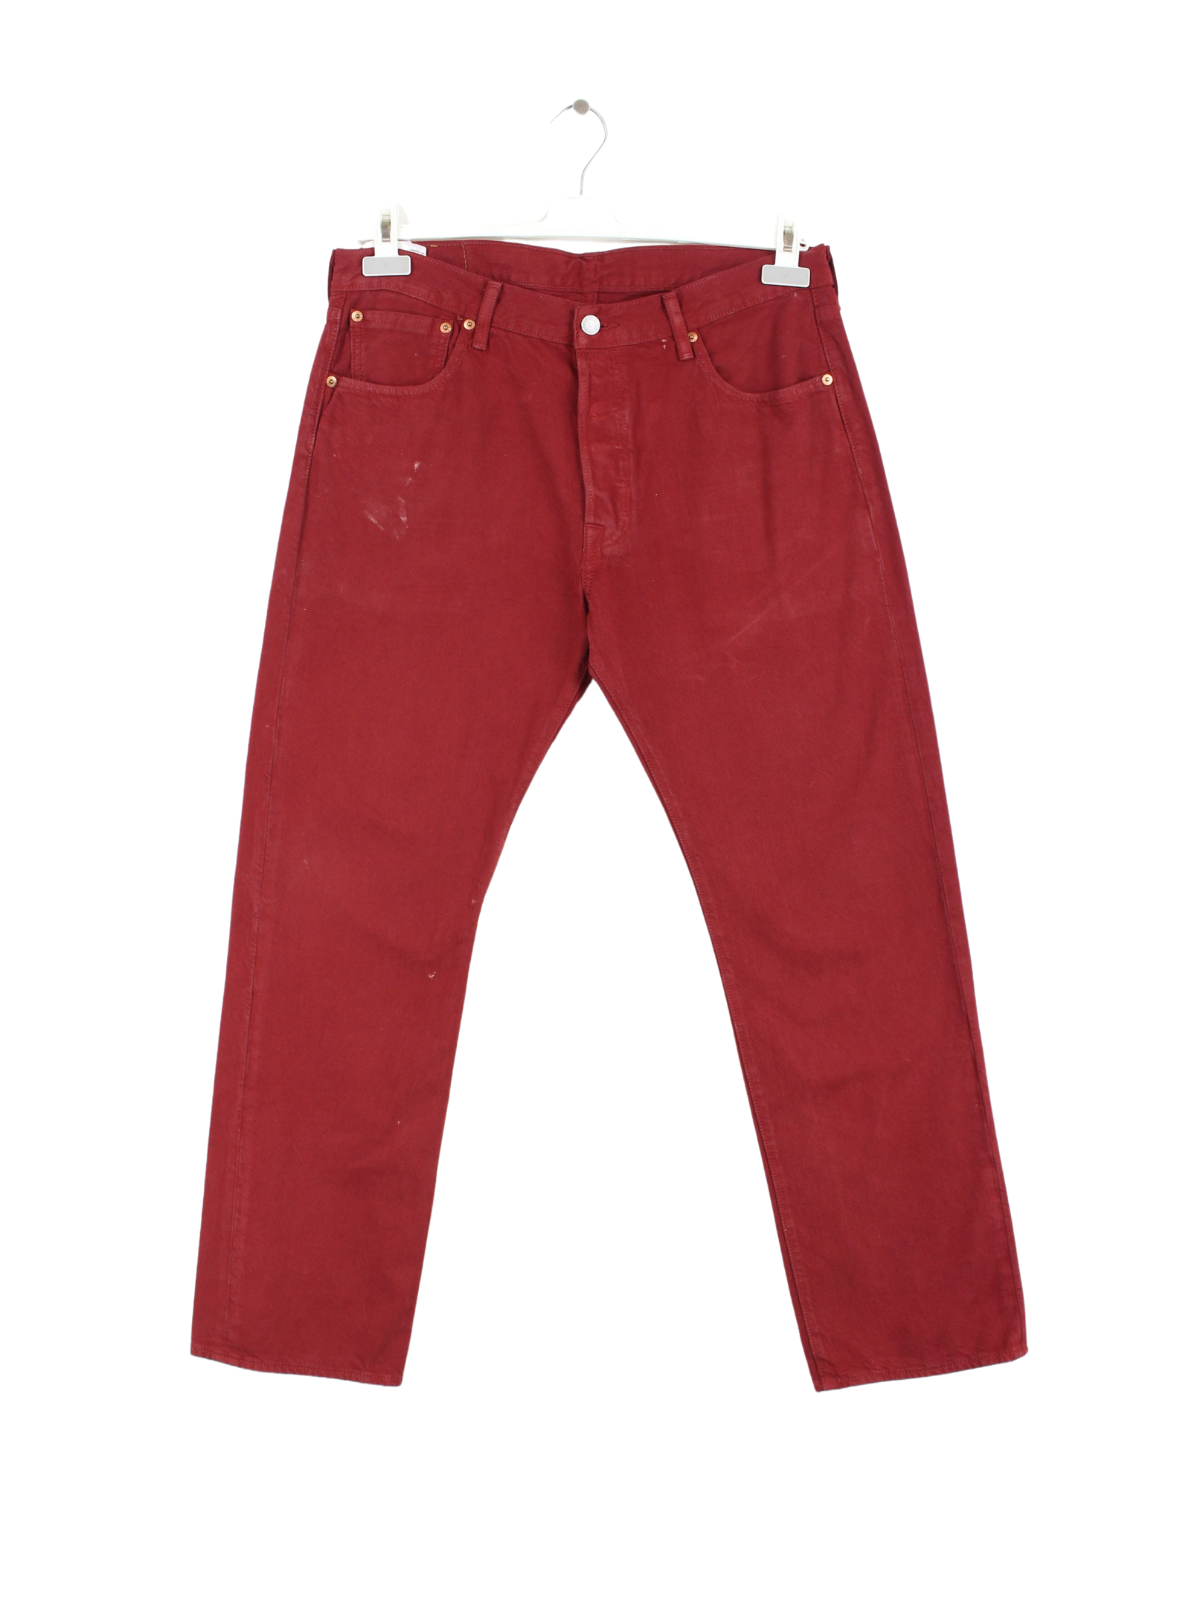 Levi's 501 Jeans Red W34 L30